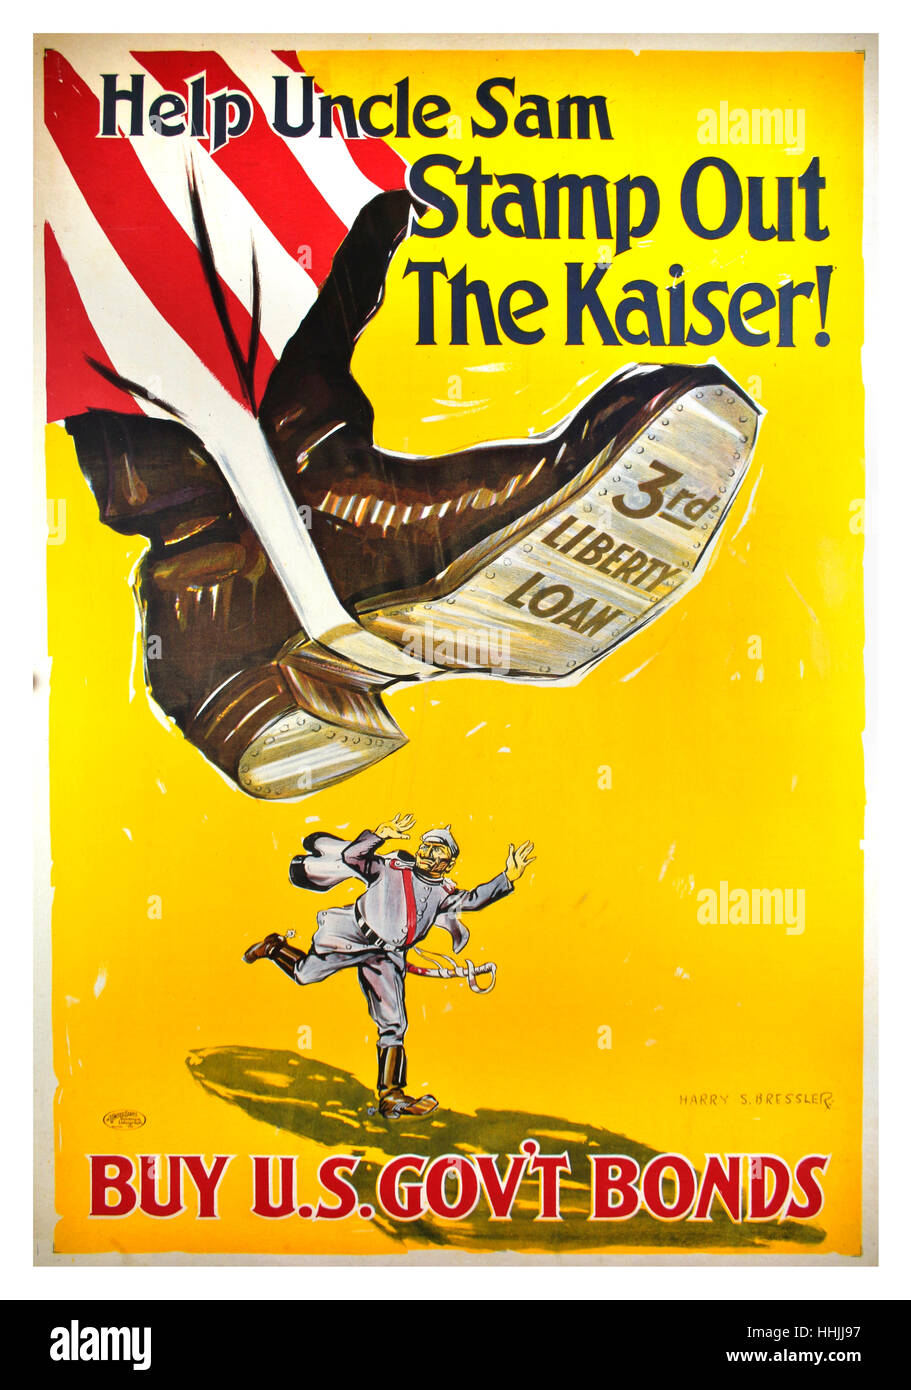 1918 Original USA WW1 propaganda poster designed by Harry S. Bressler, for the Third Liberty Bond Campaign issued Spring 1918. Poster shows mighty boot of Uncle Sam somewhat comically stamping out the King of Prussia Kaiser Wilhelm. Stock Photo